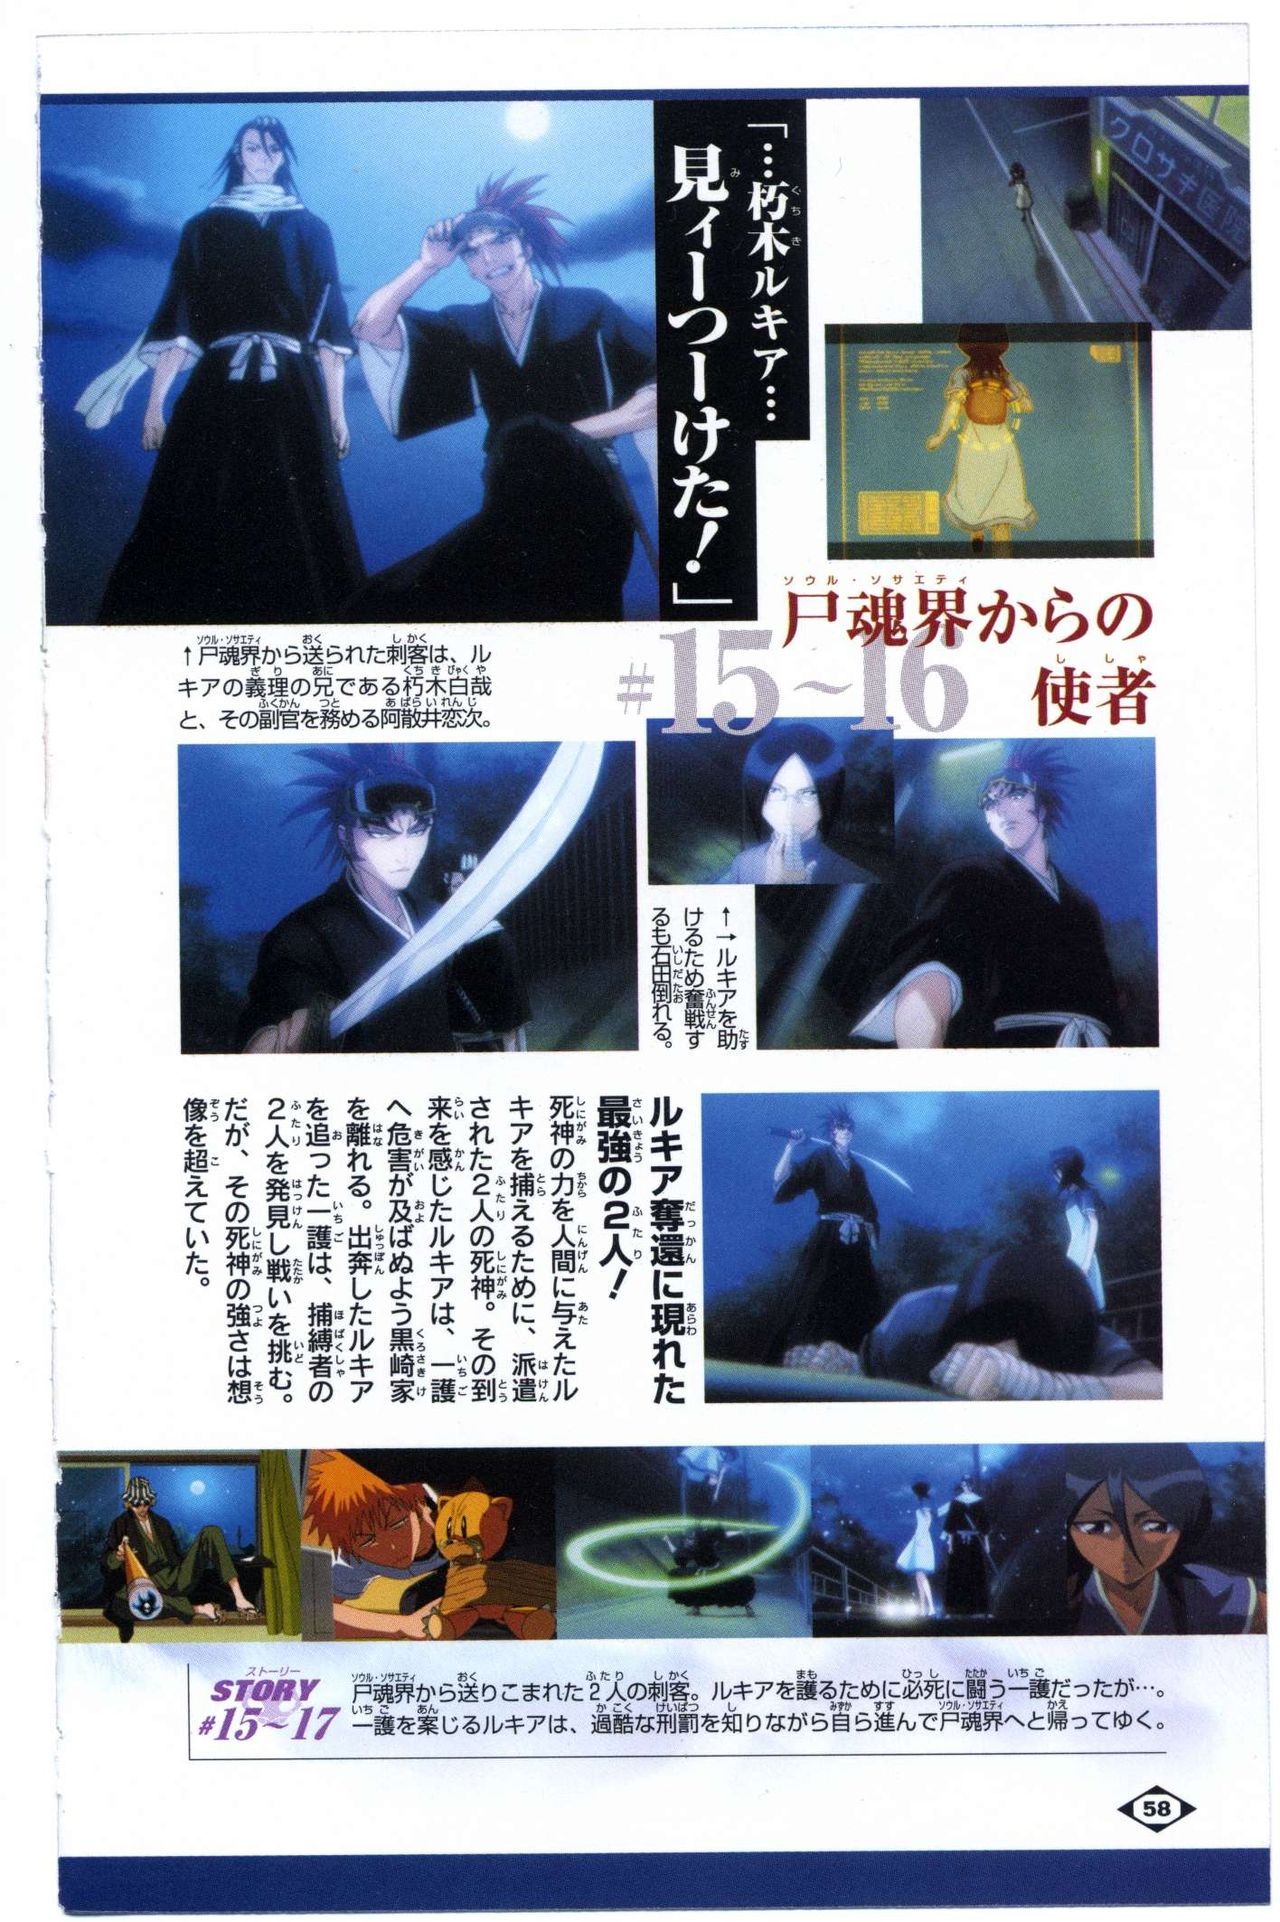 Bleach: Official Animation Book VIBEs 58